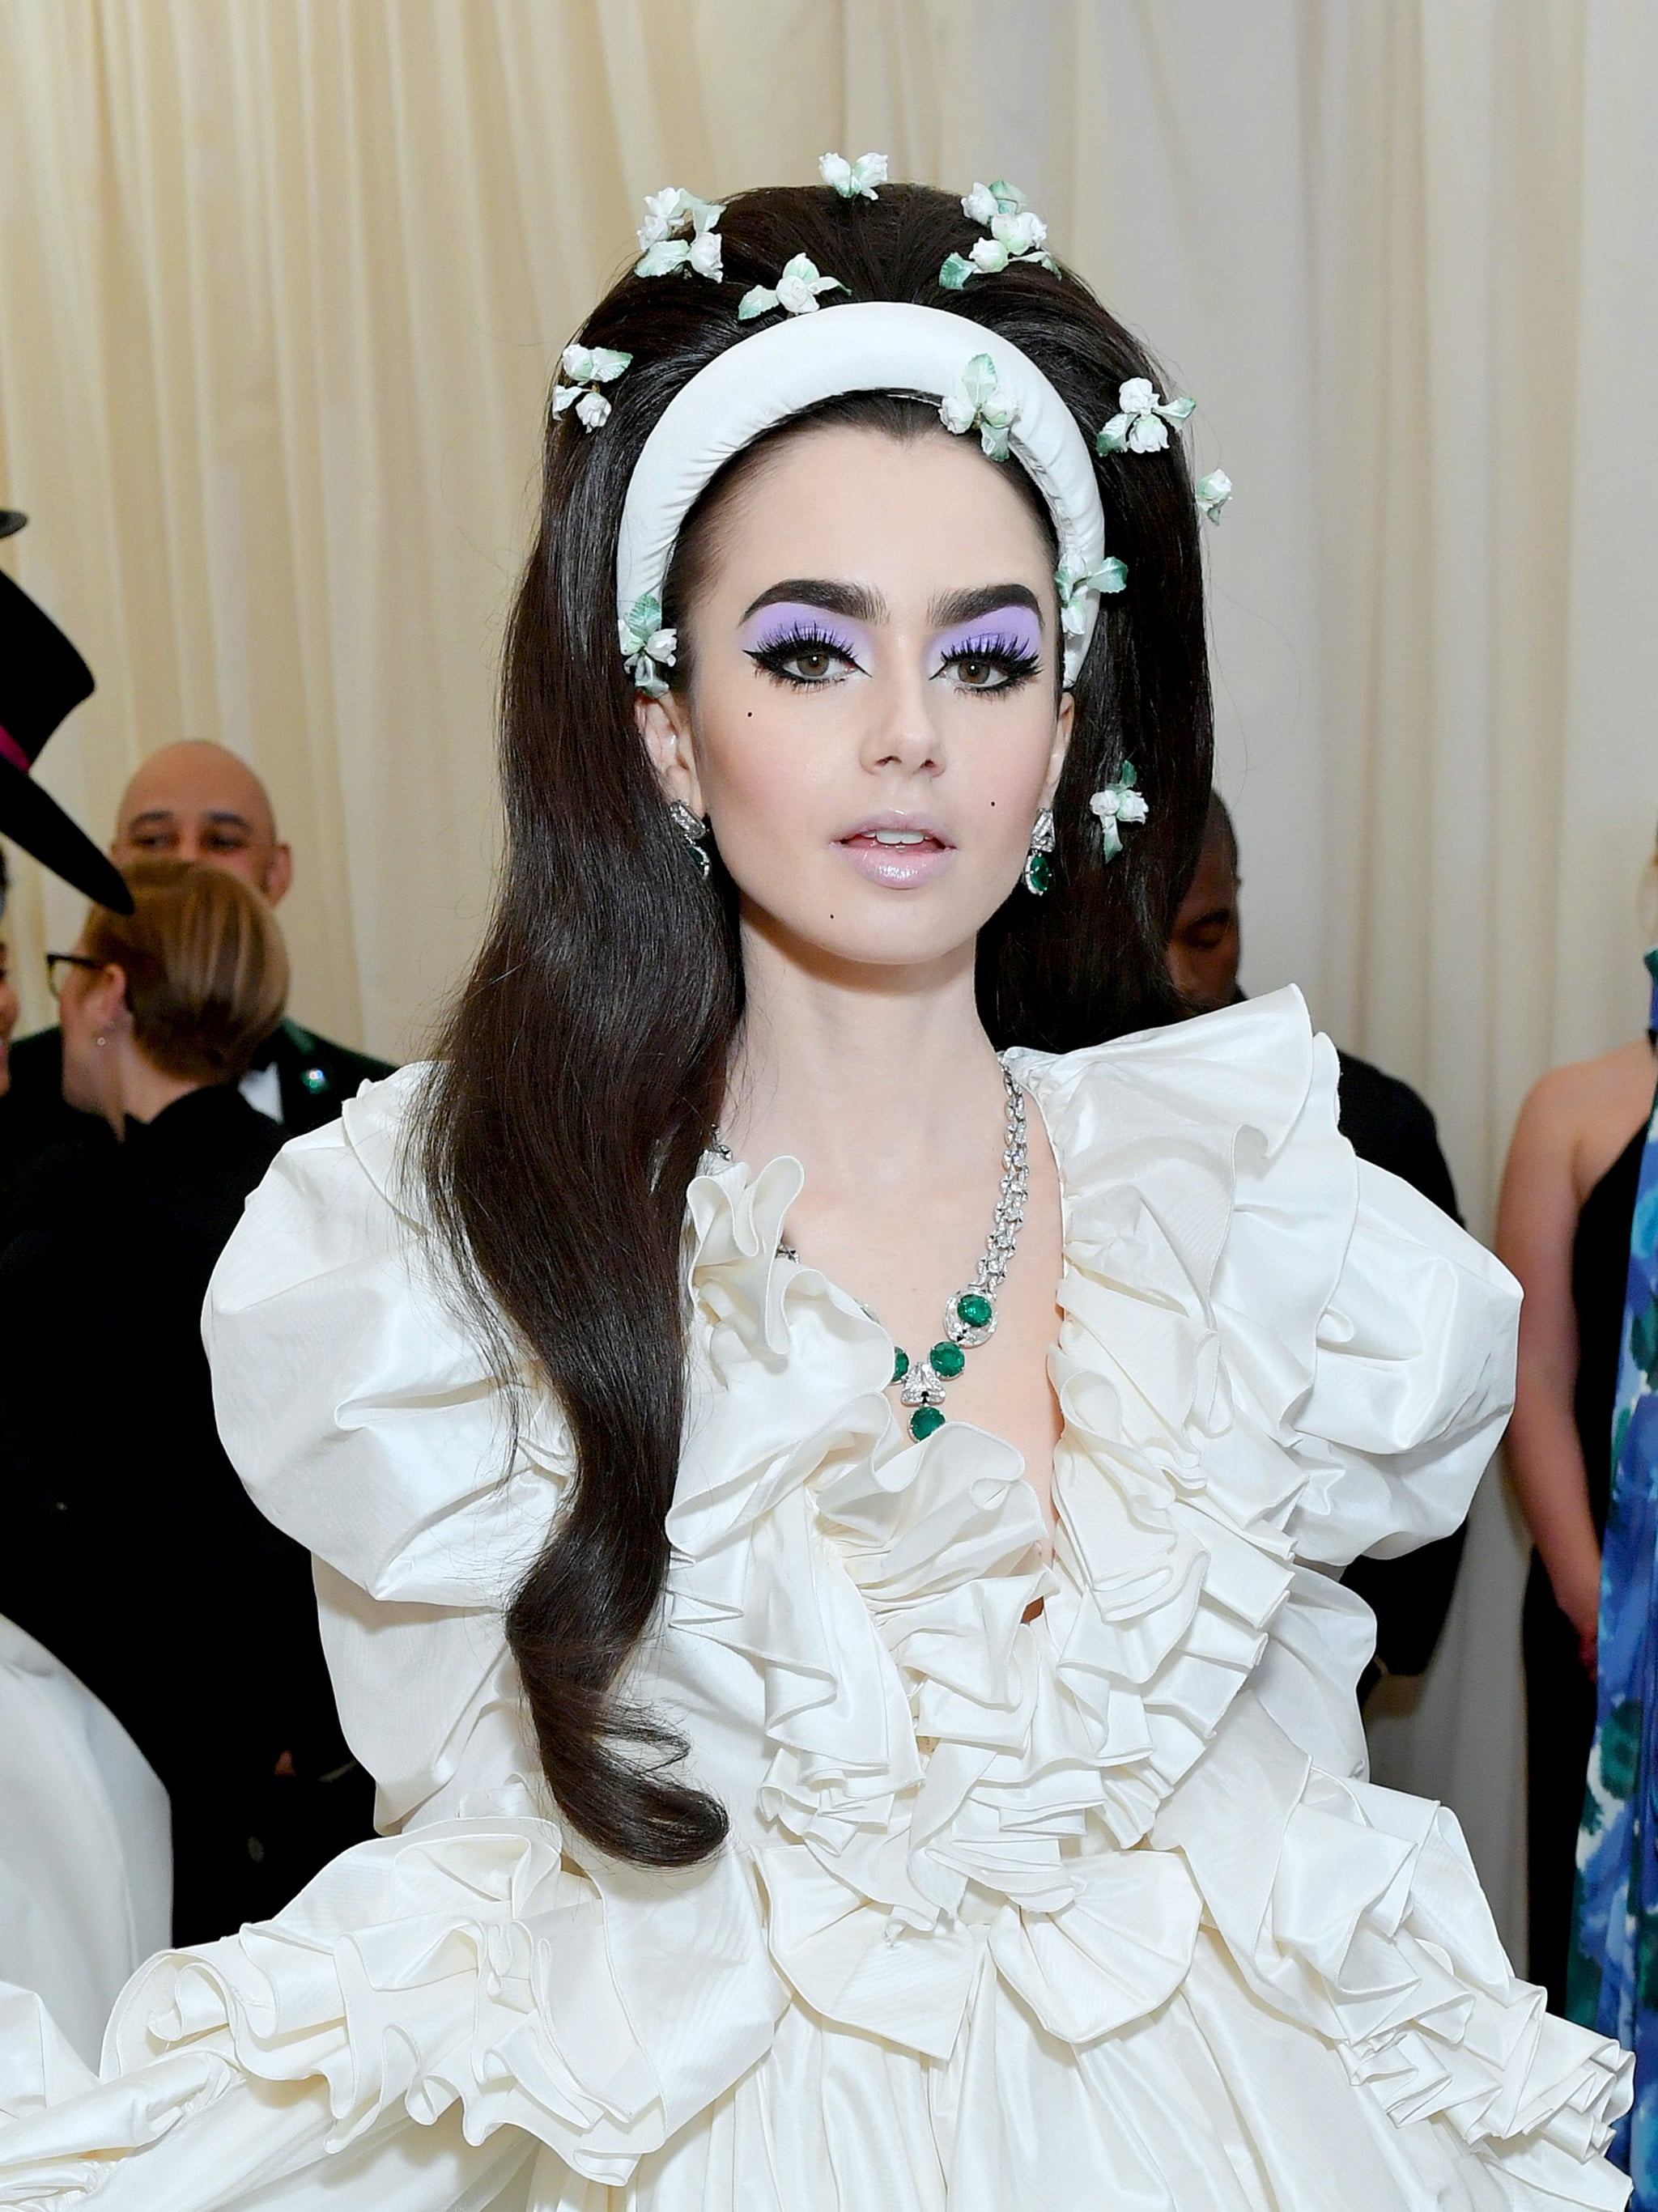 Lily Collins's Lilac Eye Shadow and Floral Hair Accessories at Met Gala | 2019 Was Dominated by Makeup, but These Were the Top Celebrity Looks | POPSUGAR Beauty Photo 5